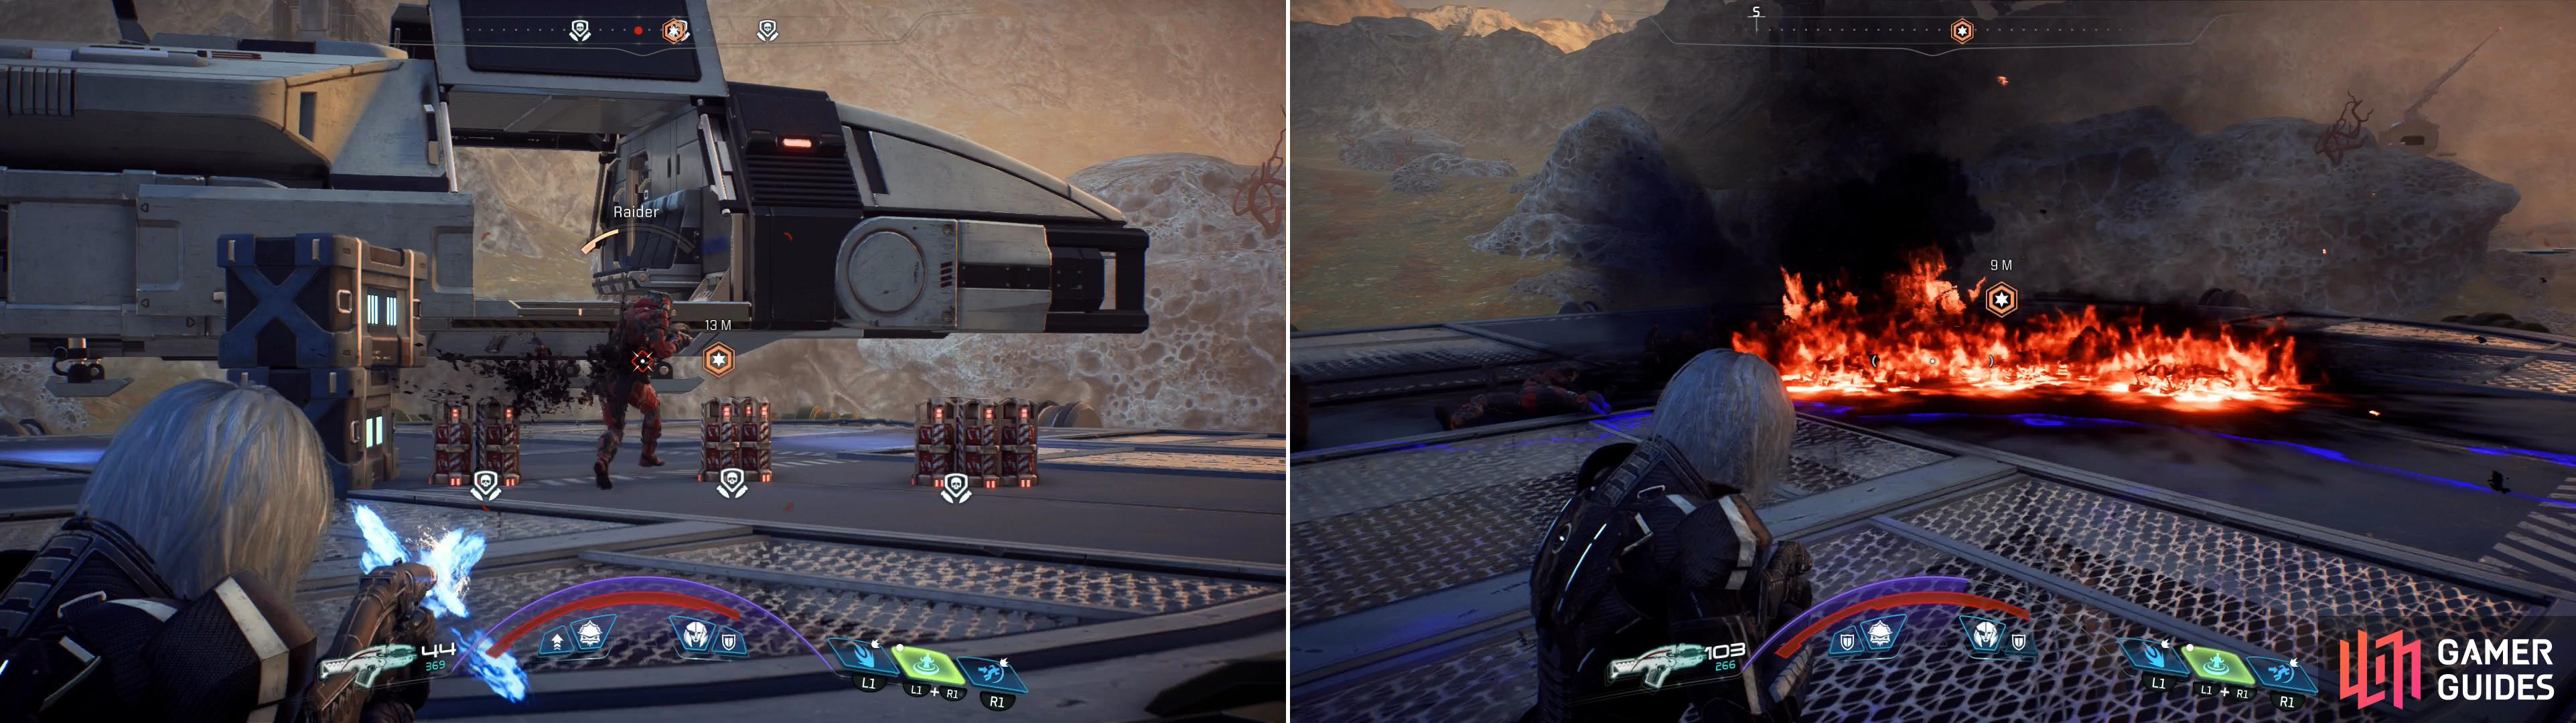 Fight your way up to the landing pad and eliminate the remaining stragglers (left) then destroy their cargo to see it never gets put to ill use (right).